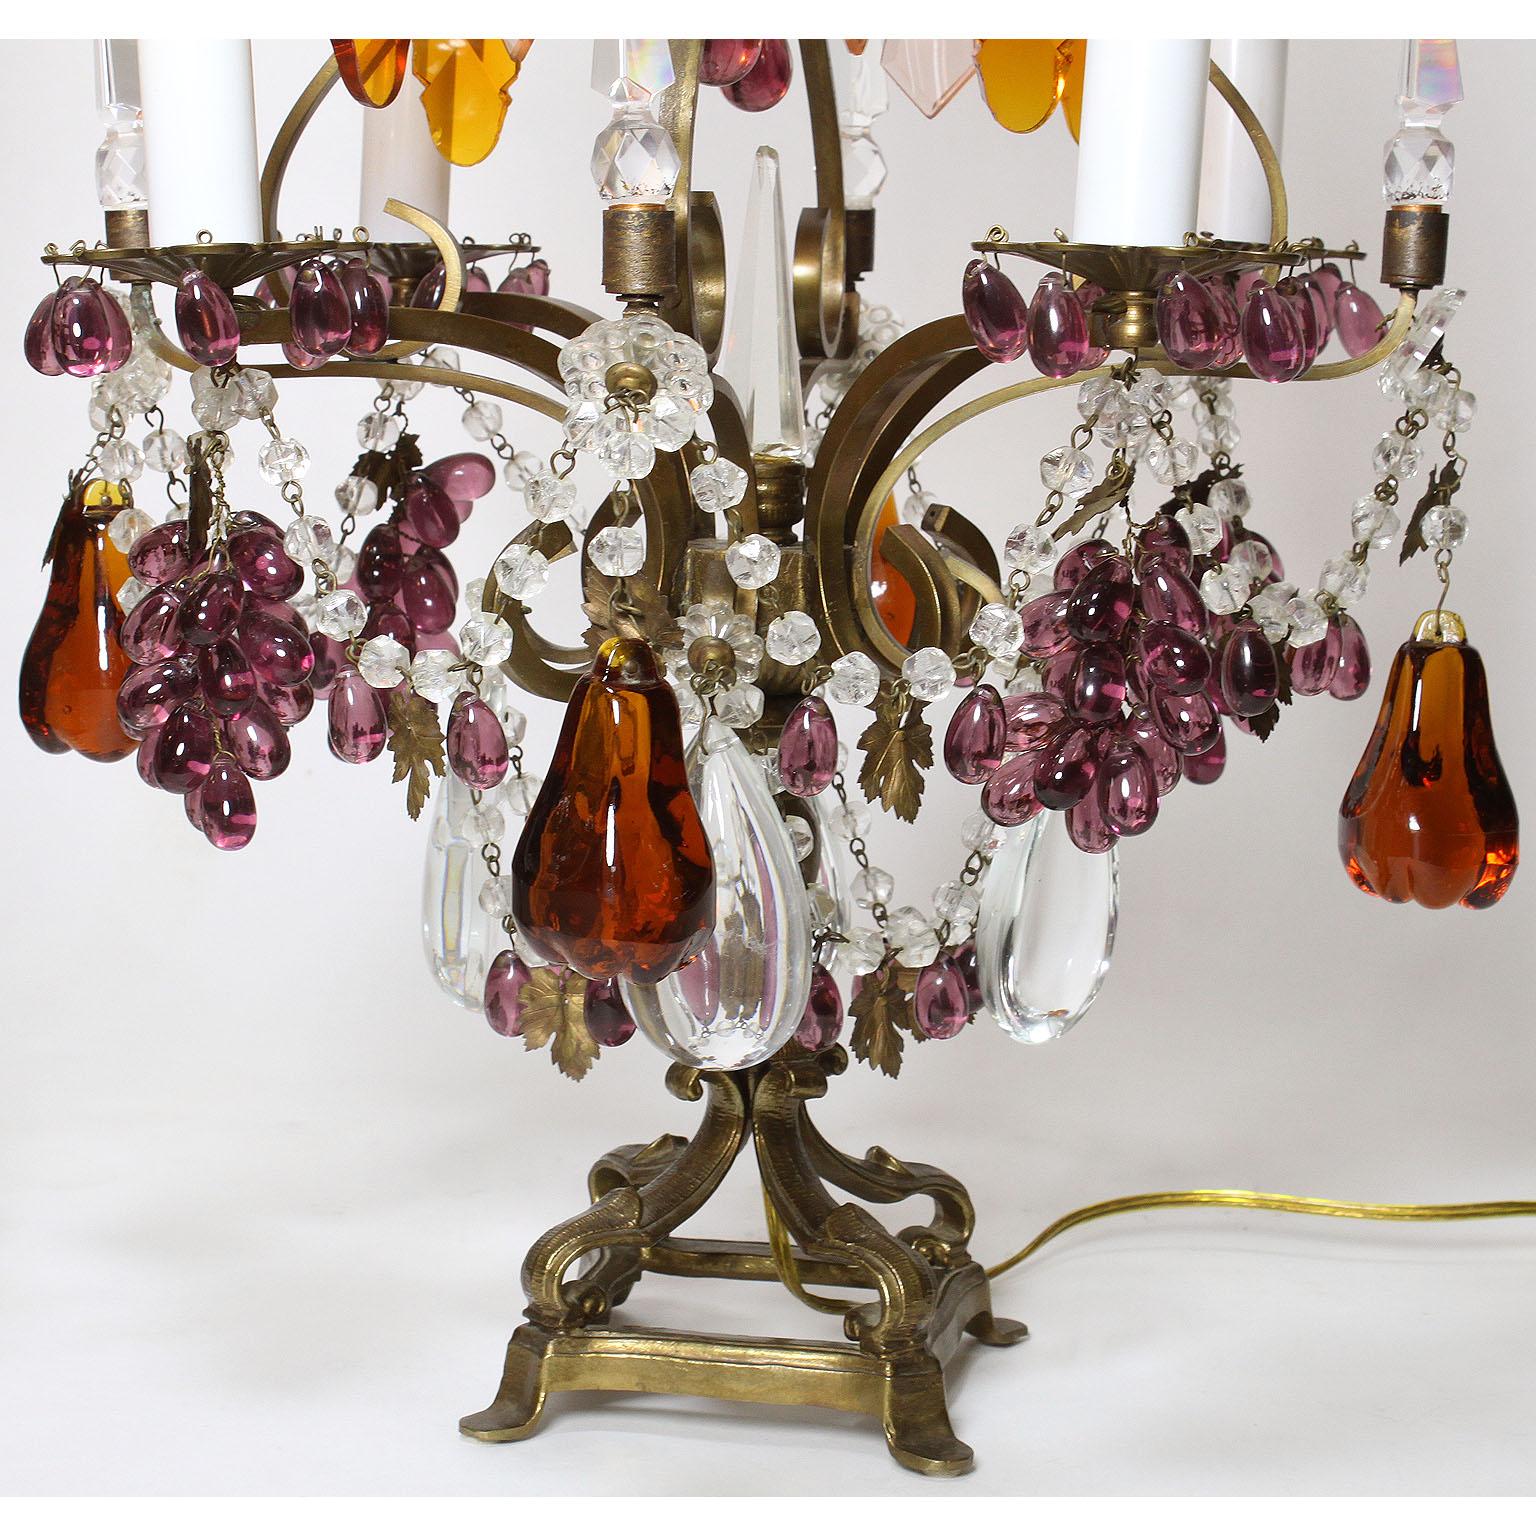 Rococo Revival Pair of 19th-20th Century Florentine Cut-Glass Fruit Girandole Table Lamps For Sale